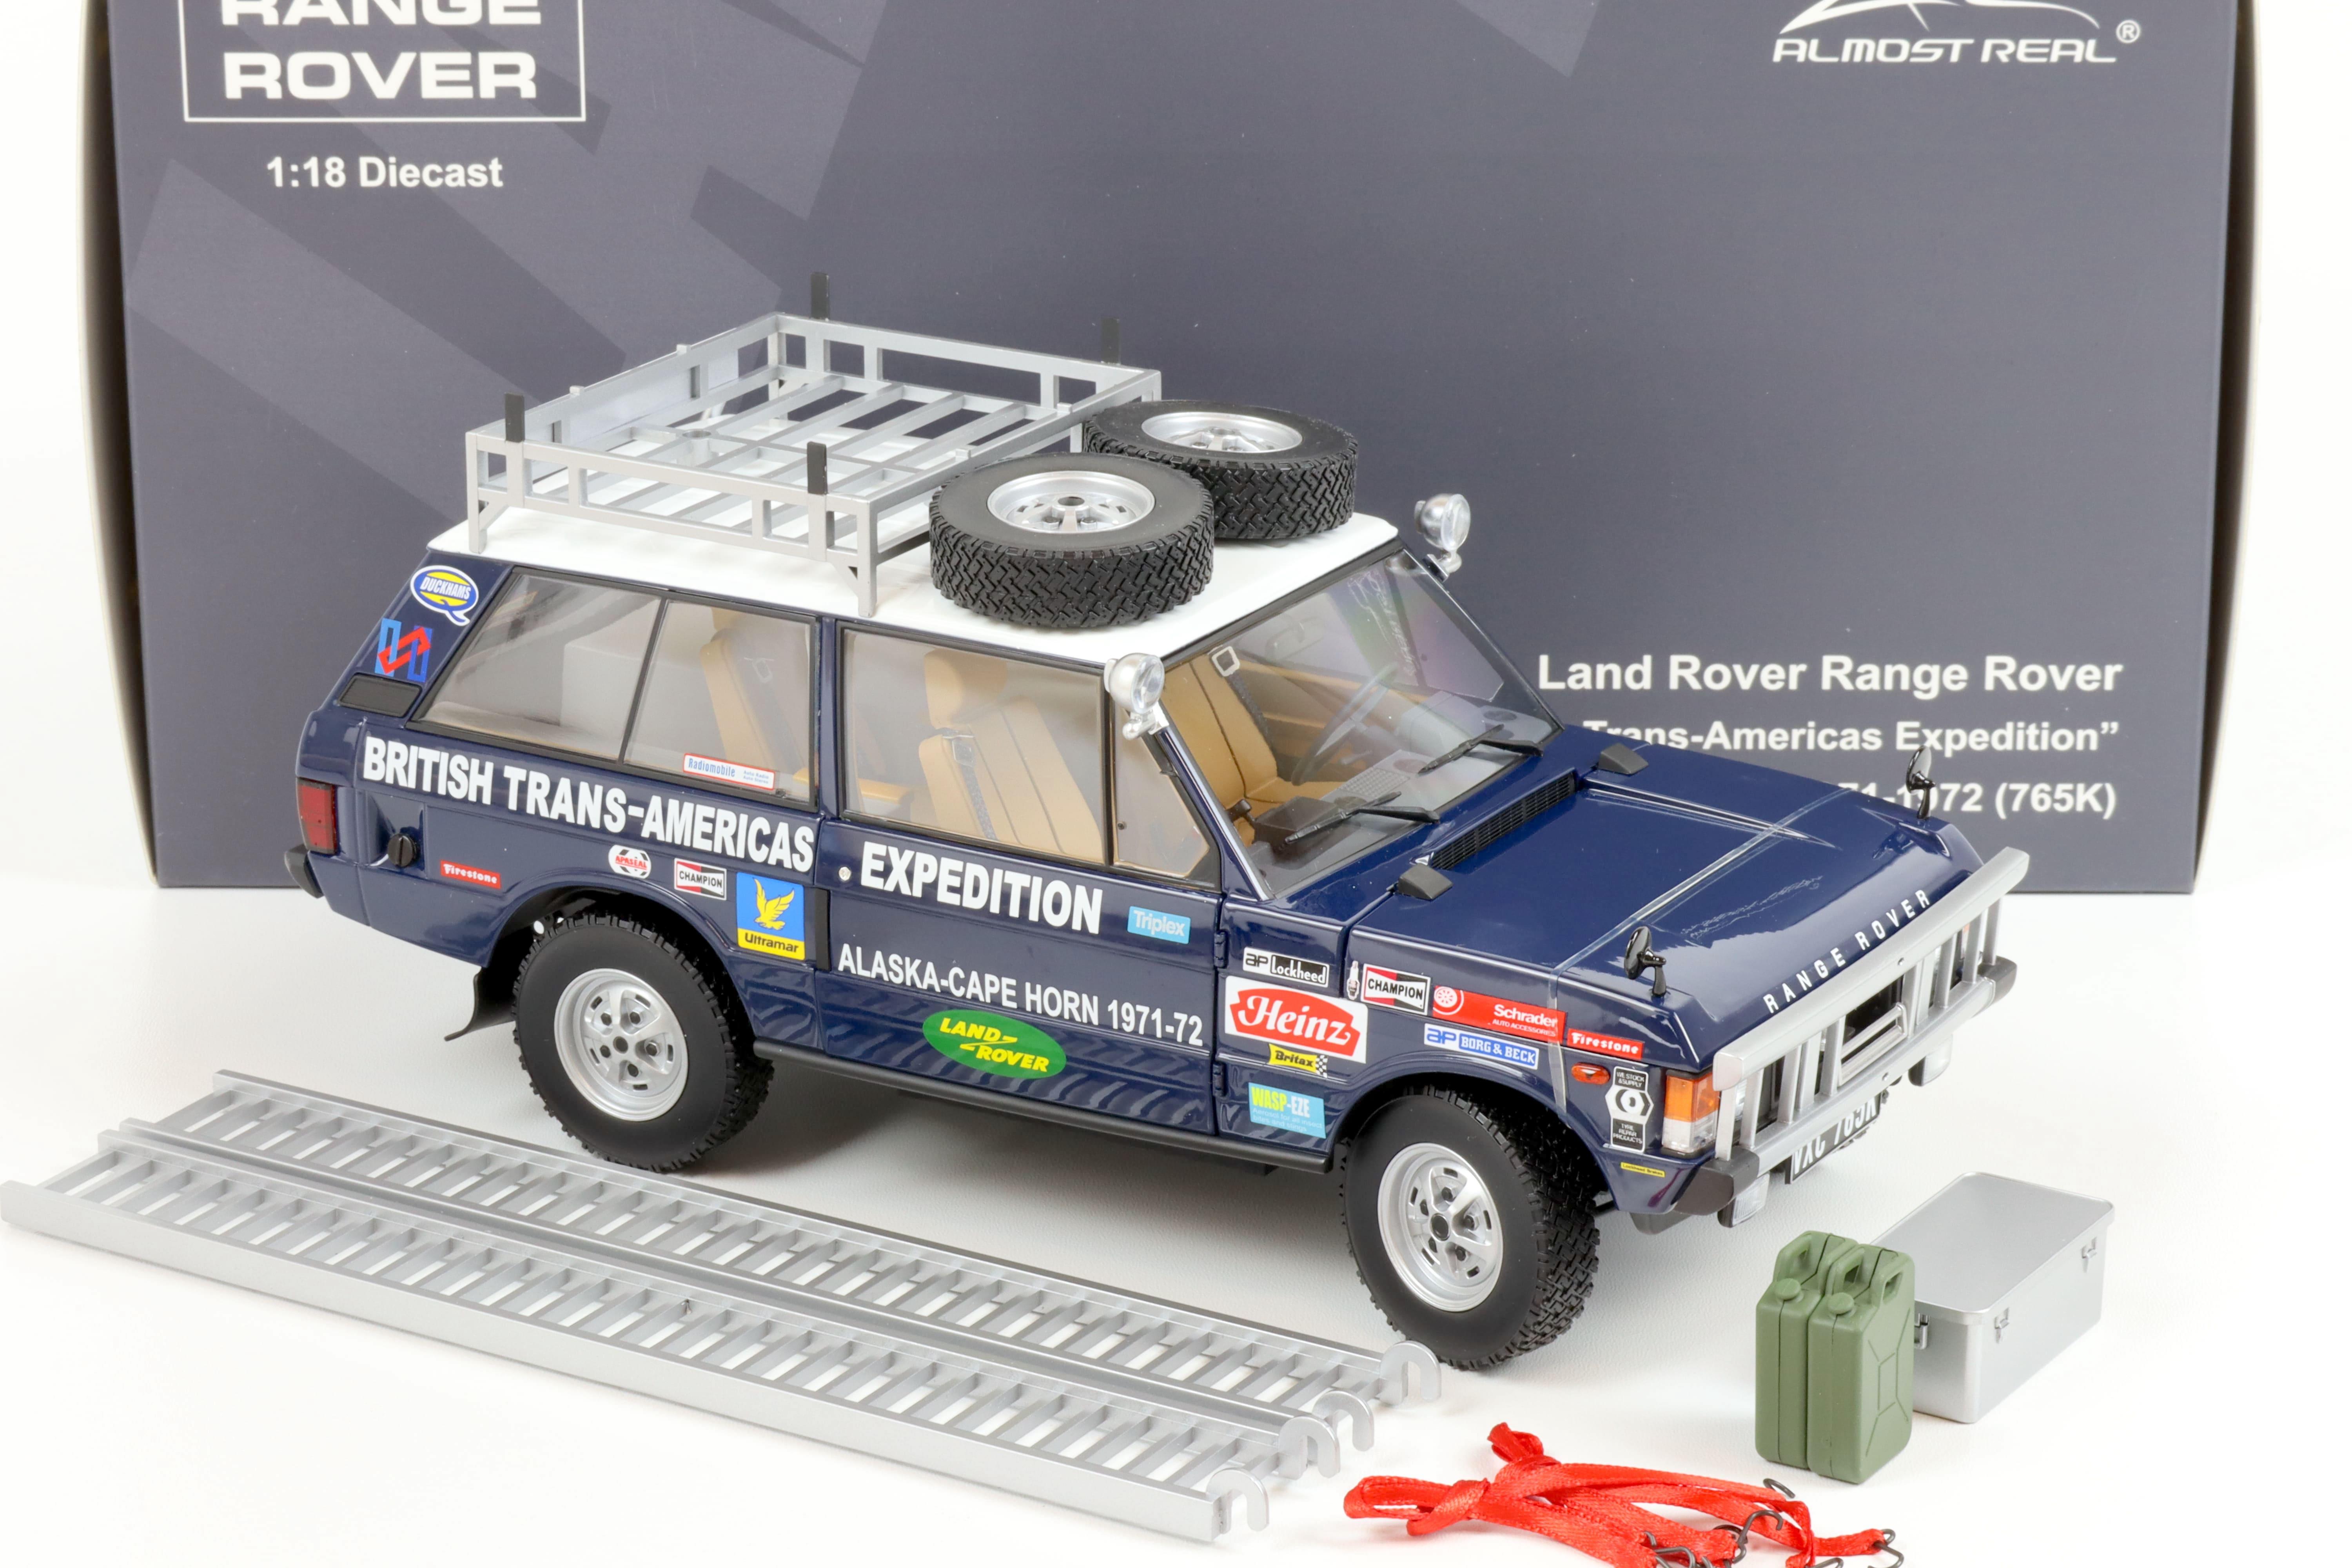 1:18 Almost Real Land Rover Range Rover Trans-Americans Expedition 765K 1971-72